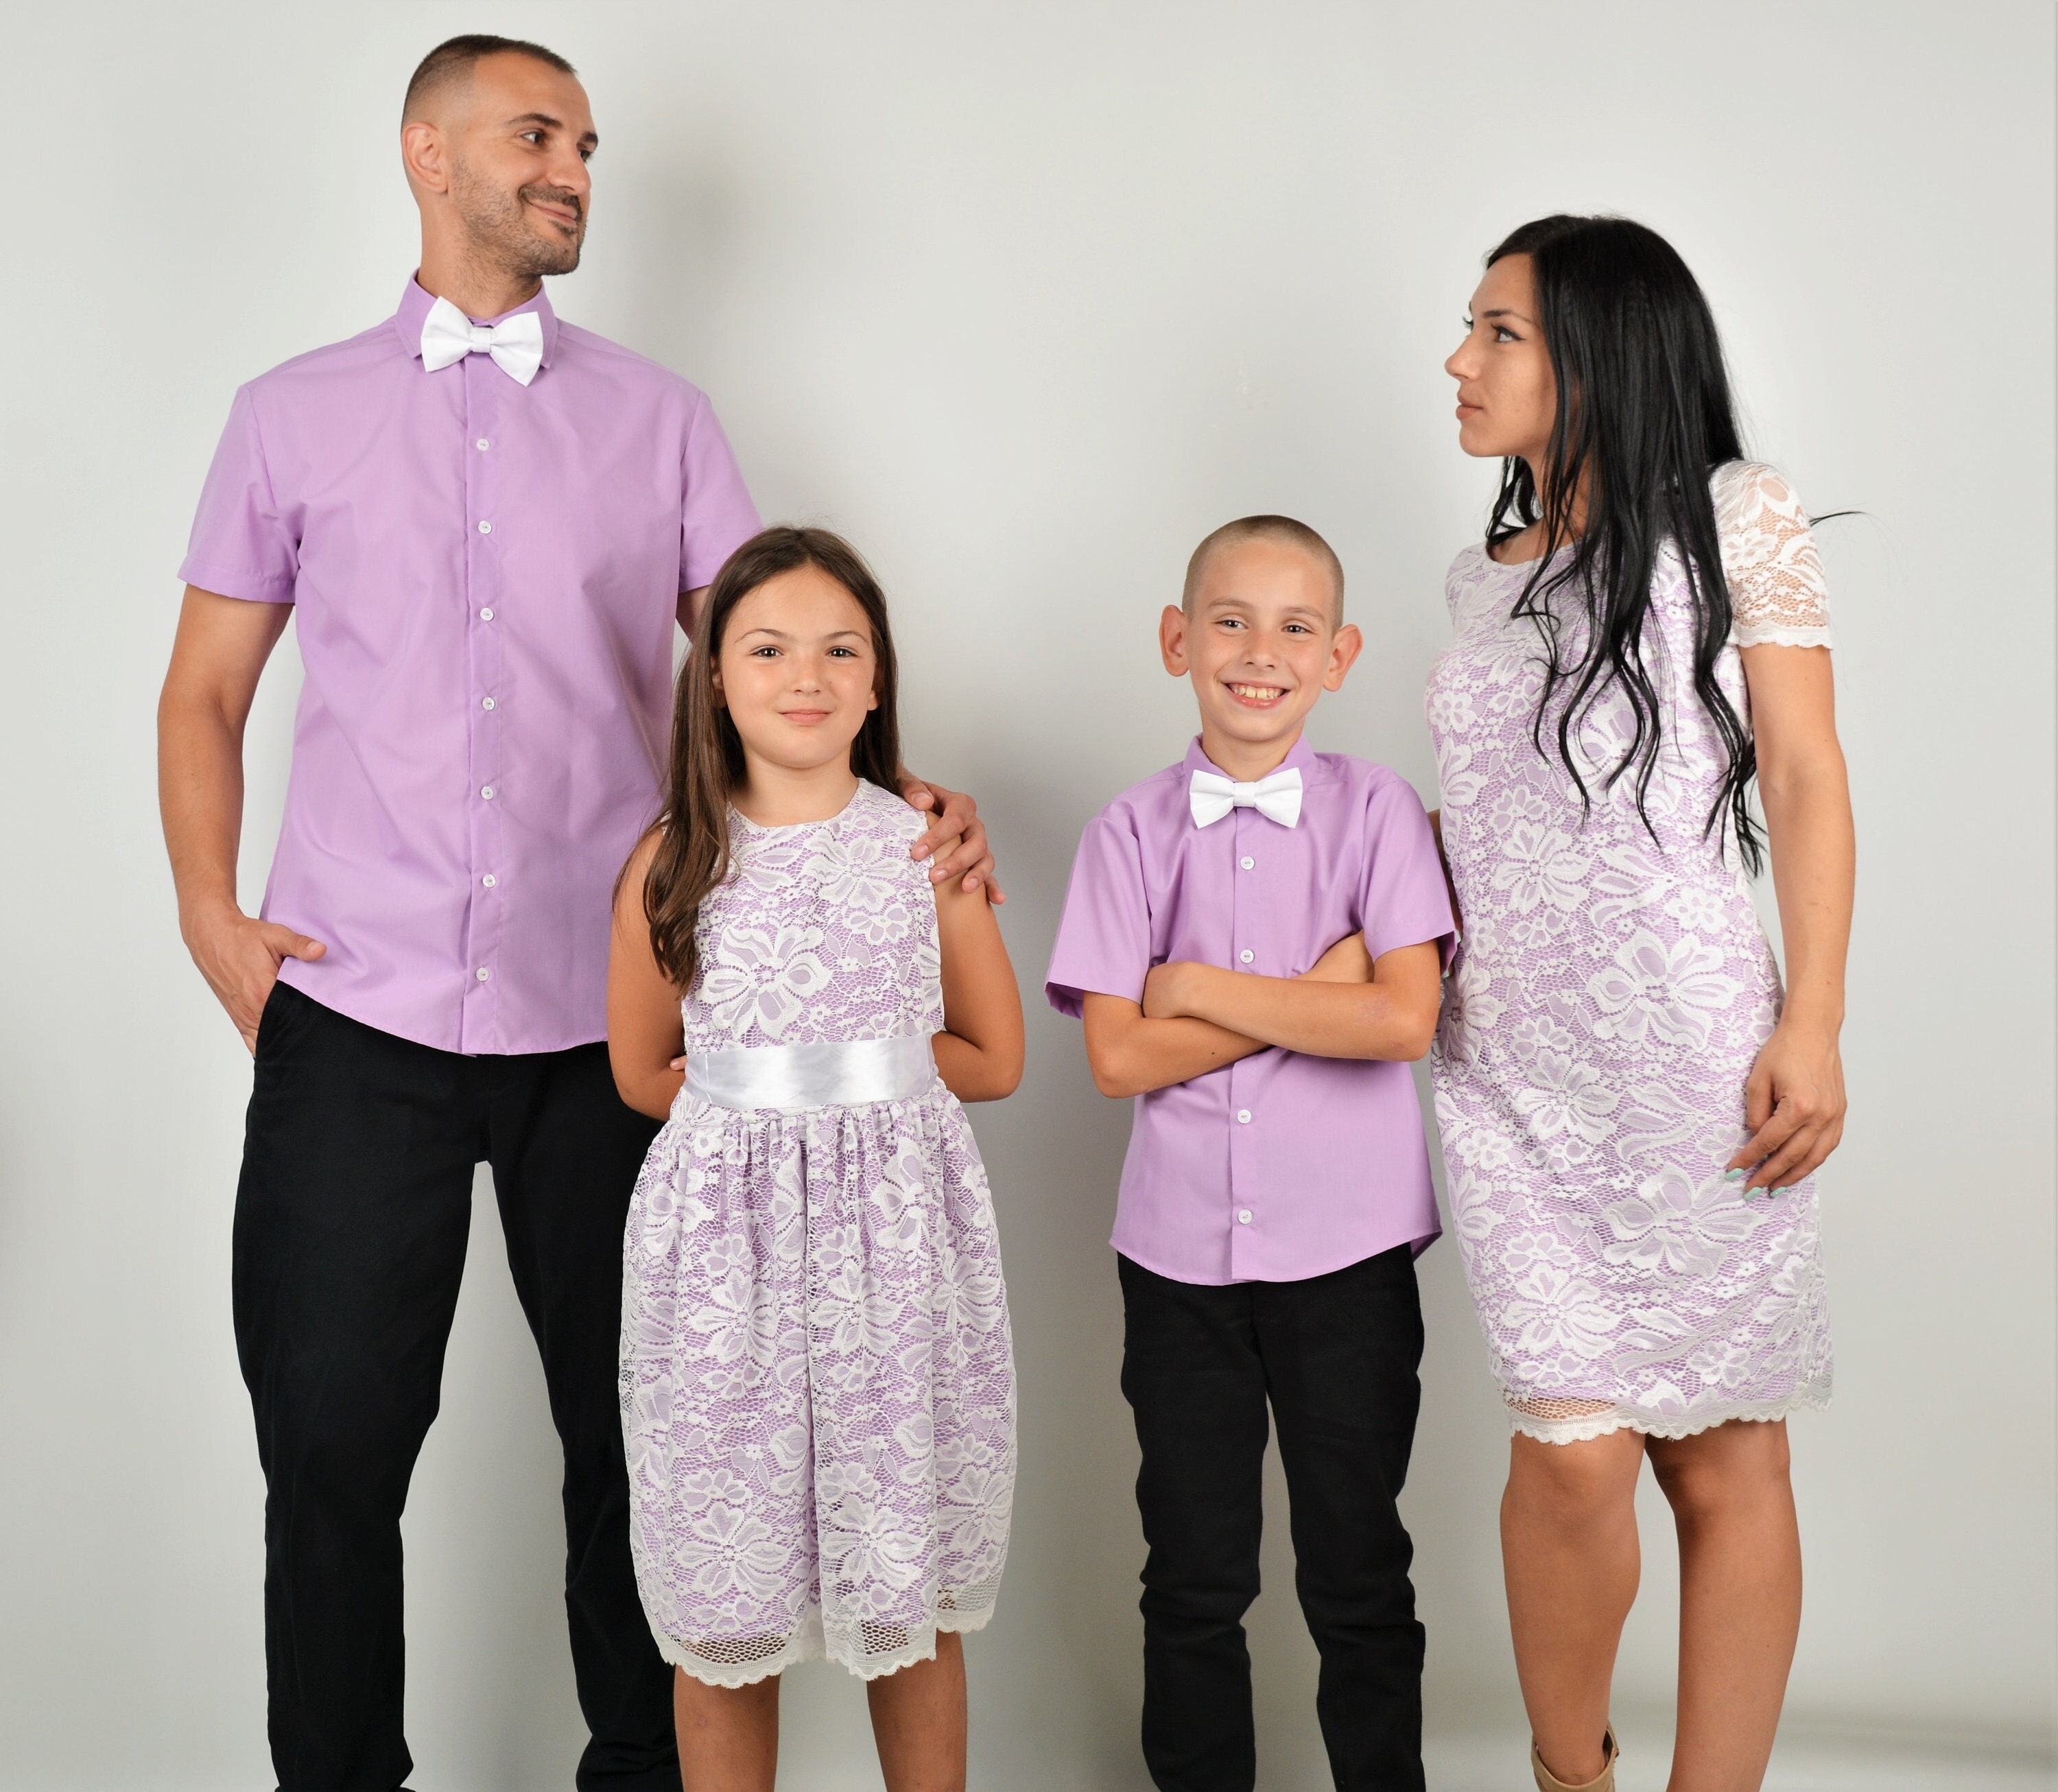 Matching Outfits for Photoshoot, Family Lilac Outfits for Picture, Family  Wedding Outfit, Matching Outfits for Special Occasion, Lilac - Etsy